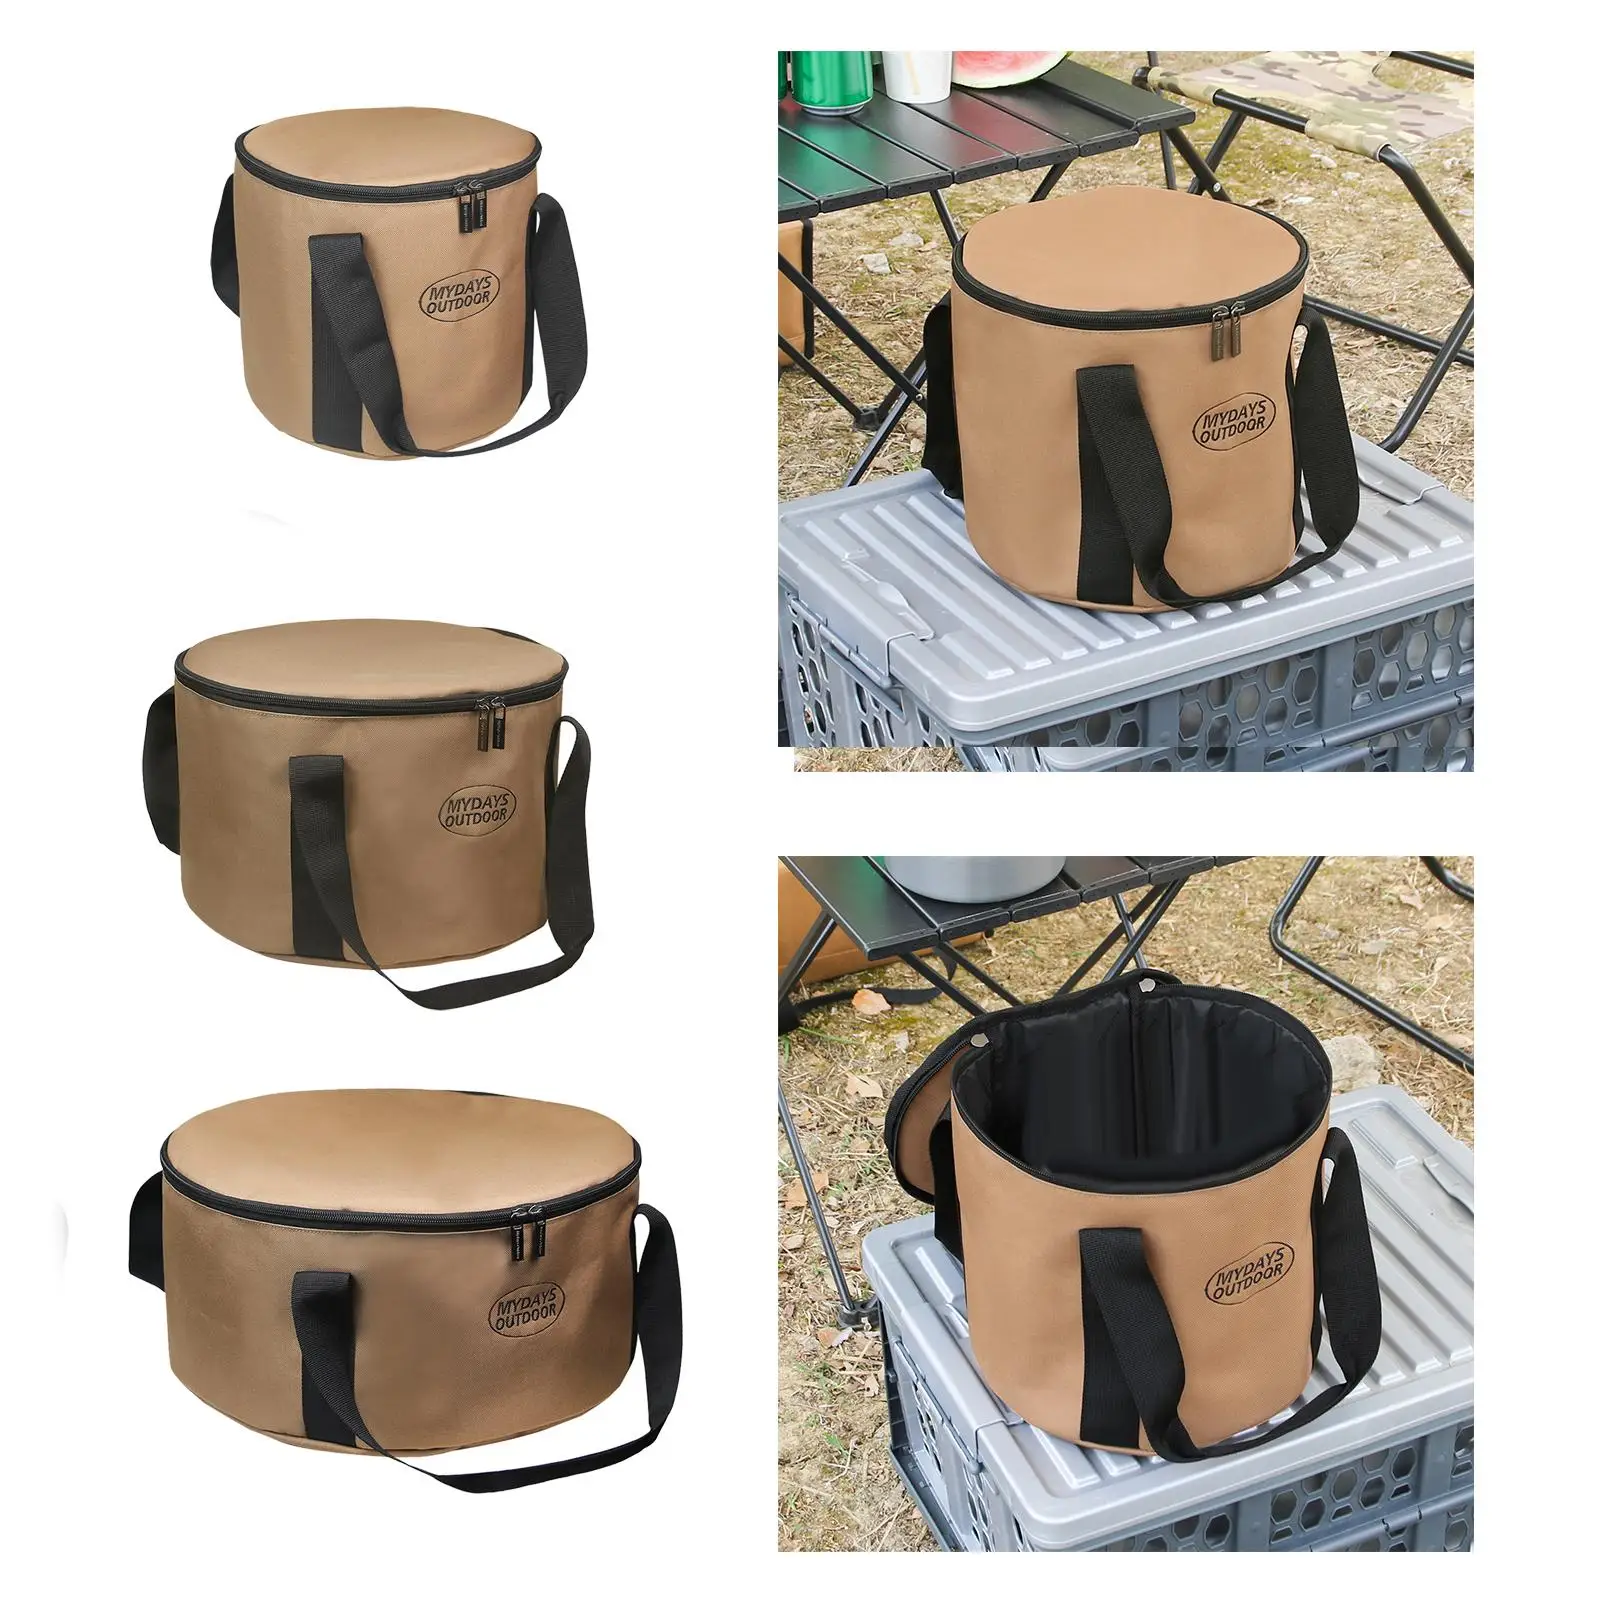 Camping Pot Storage Bag Portable Fishing Gear Bag, Wear Resistant Protective